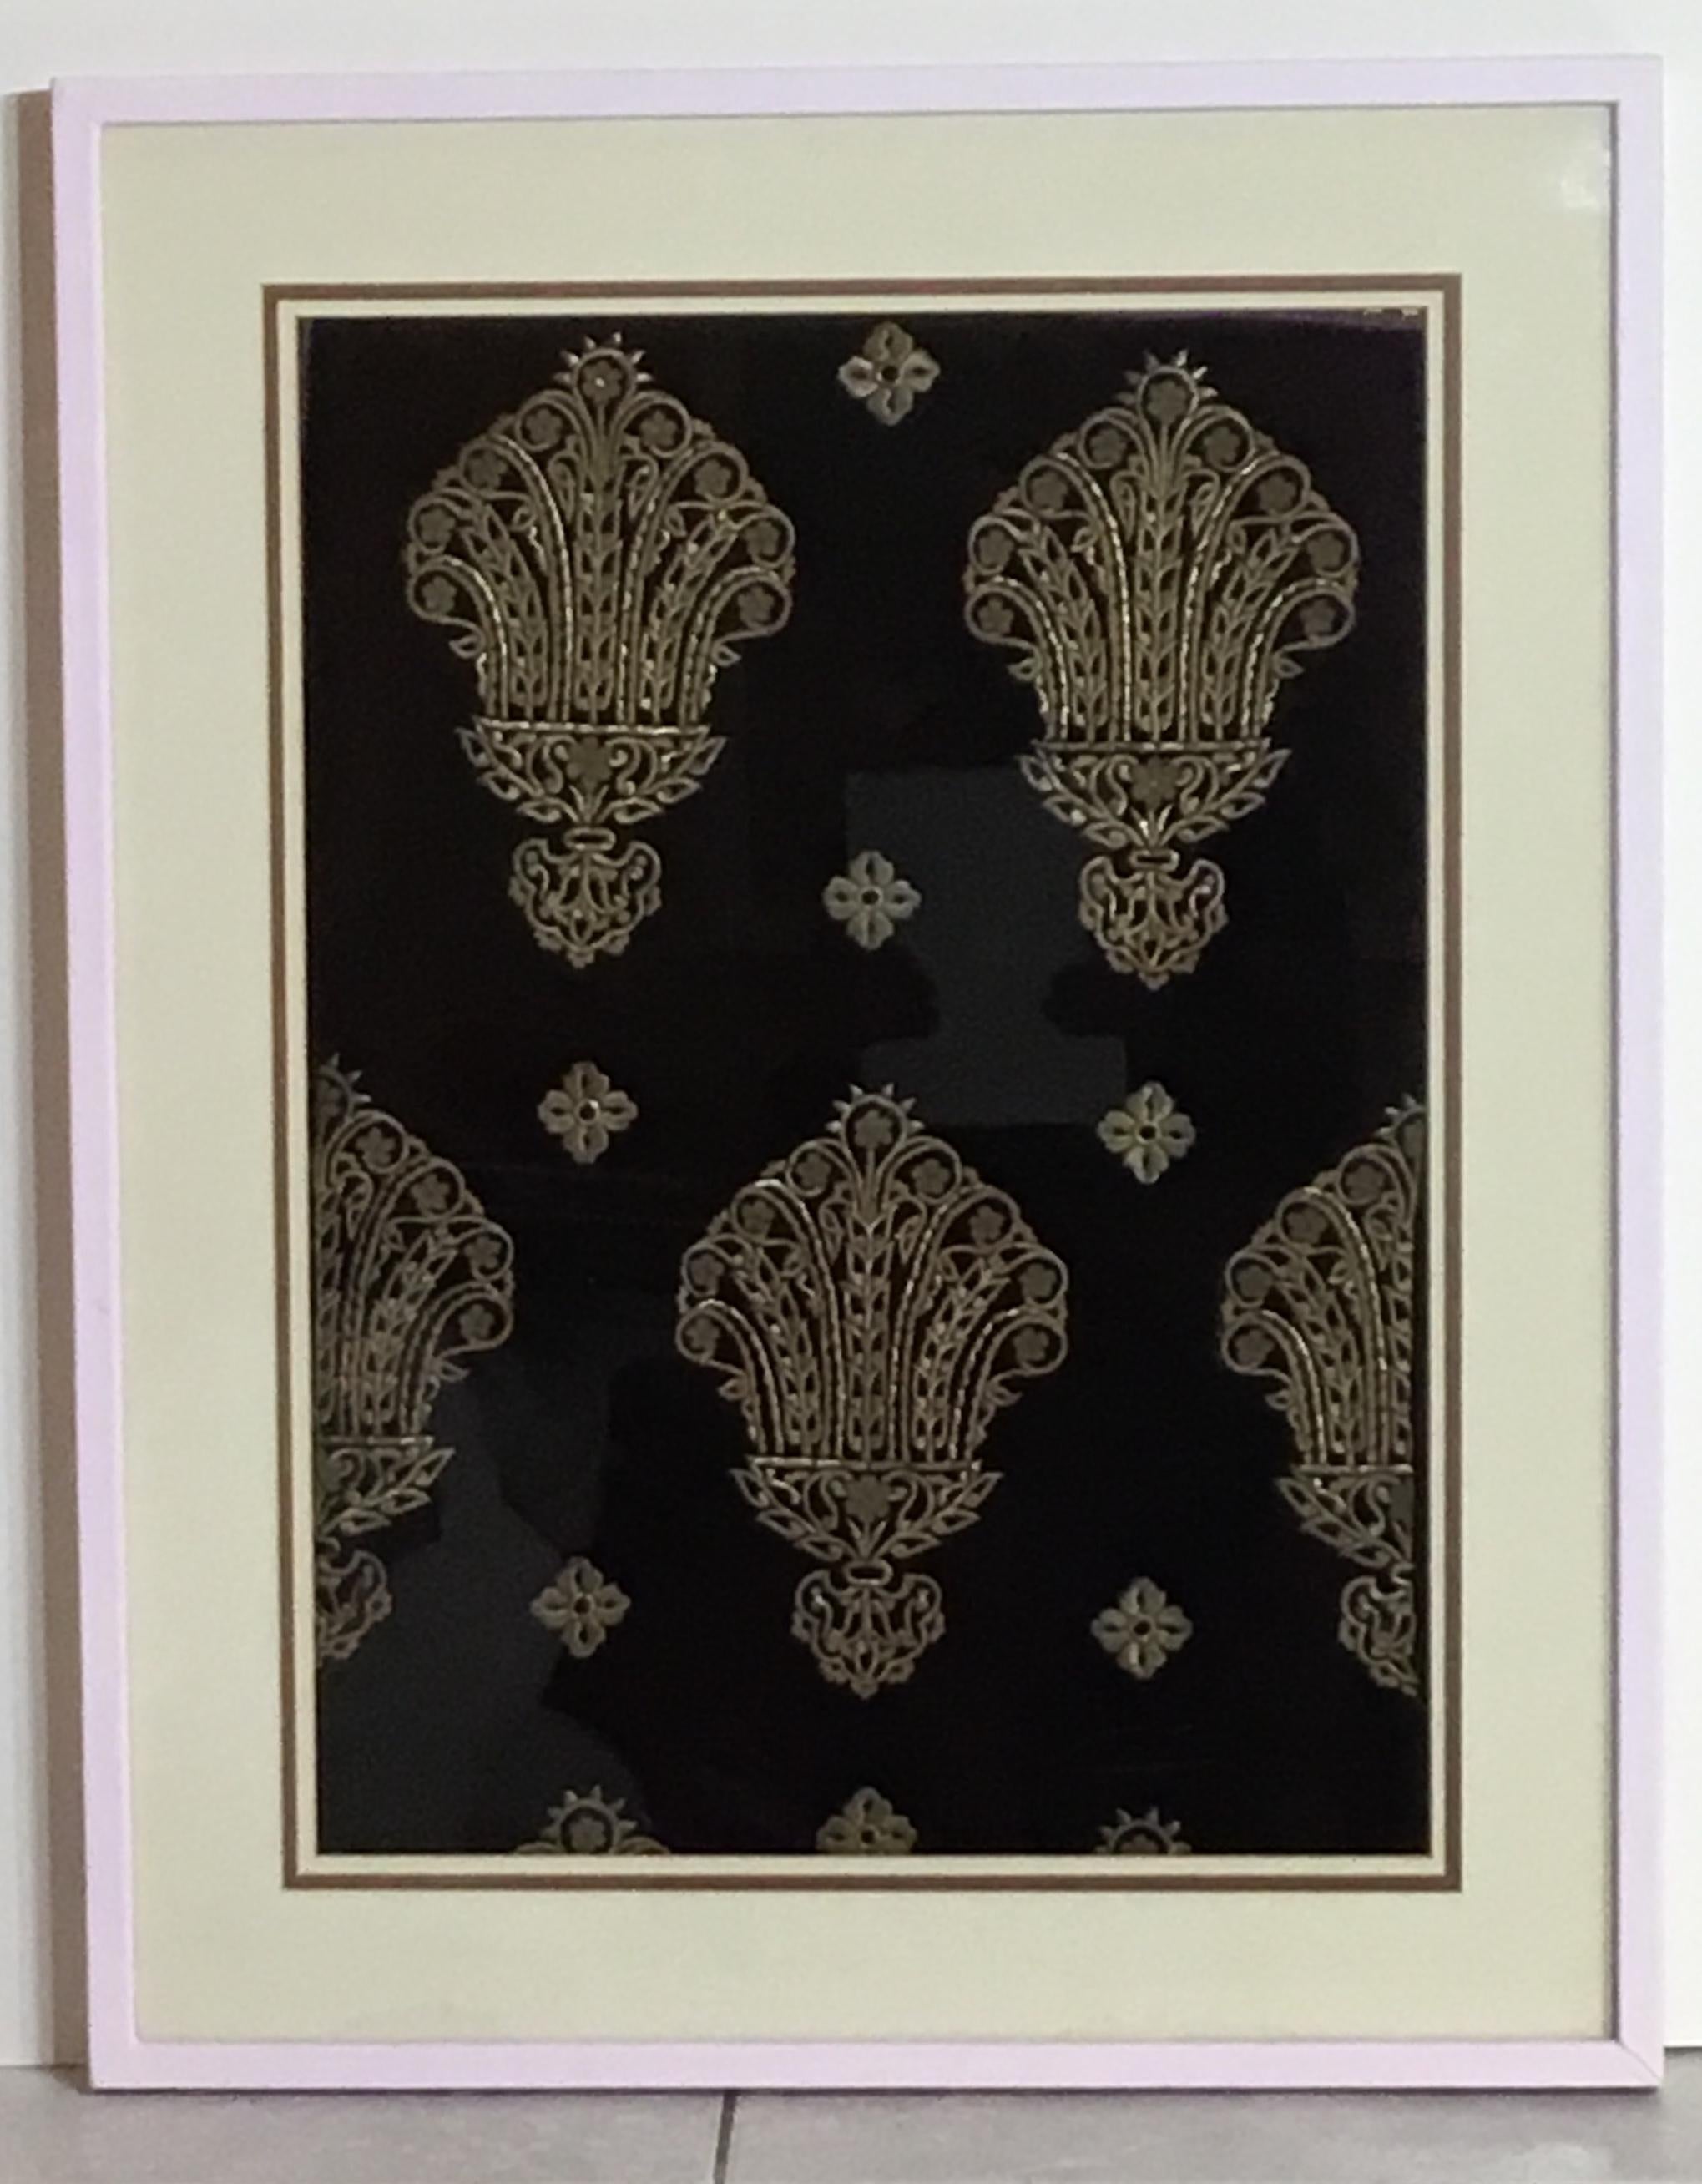 Turkish Hand Embroidery Textile in Shadowbox For Sale 7